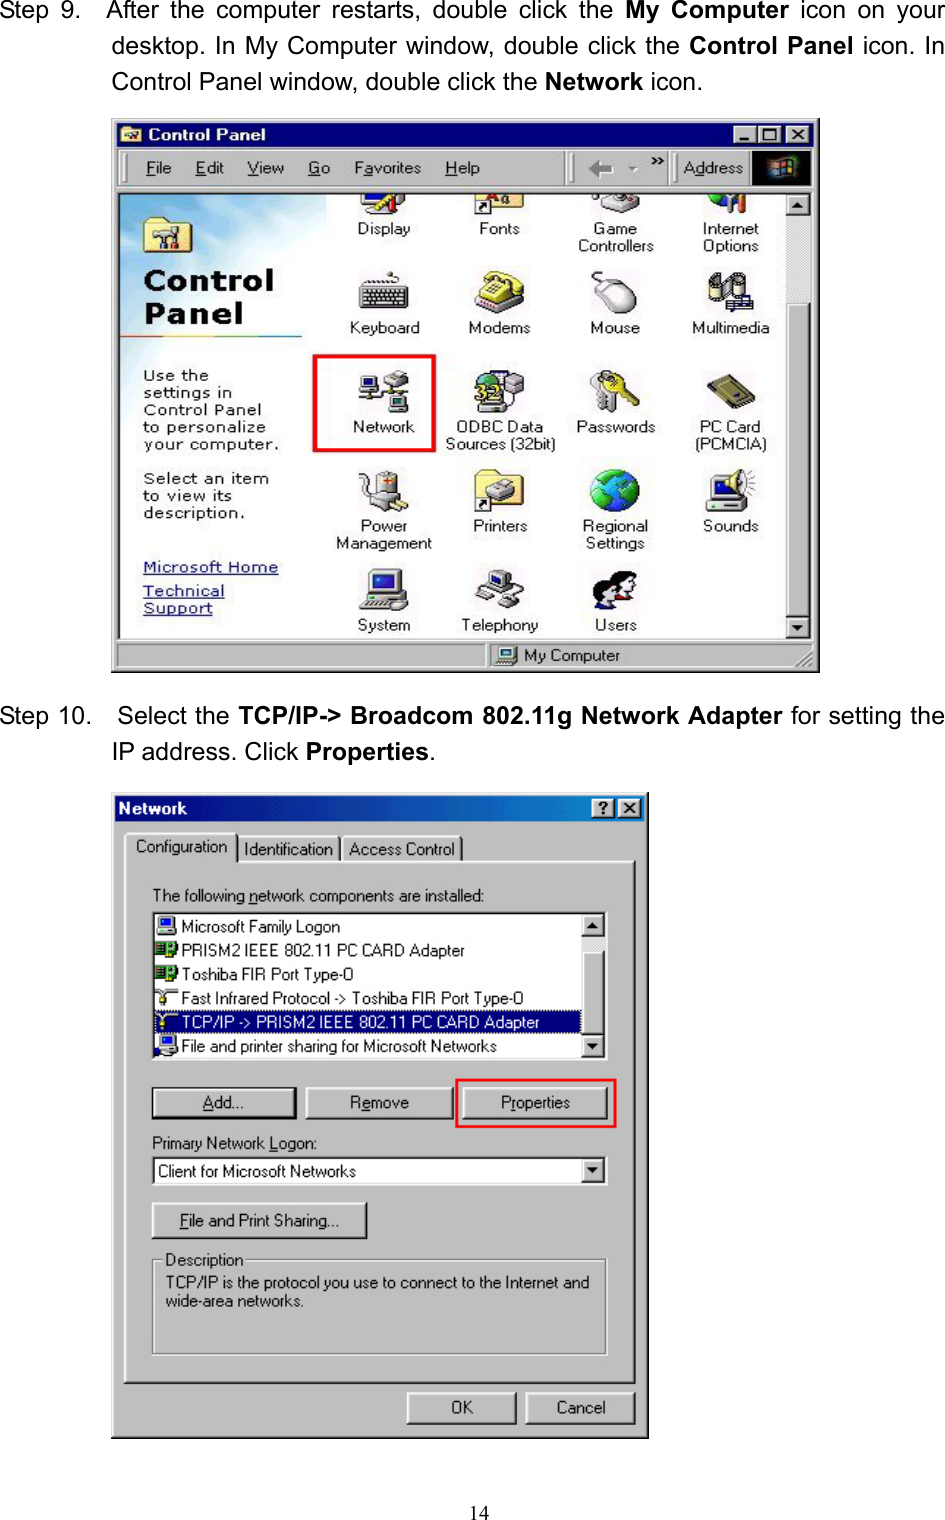   14 Step 9.  After the computer restarts, double click the My Computer icon on your desktop. In My Computer window, double click the Control Panel icon. In Control Panel window, double click the Network icon.                   Step 10.    Select the TCP/IP-&gt; Broadcom 802.11g Network Adapter for setting the IP address. Click Properties.  